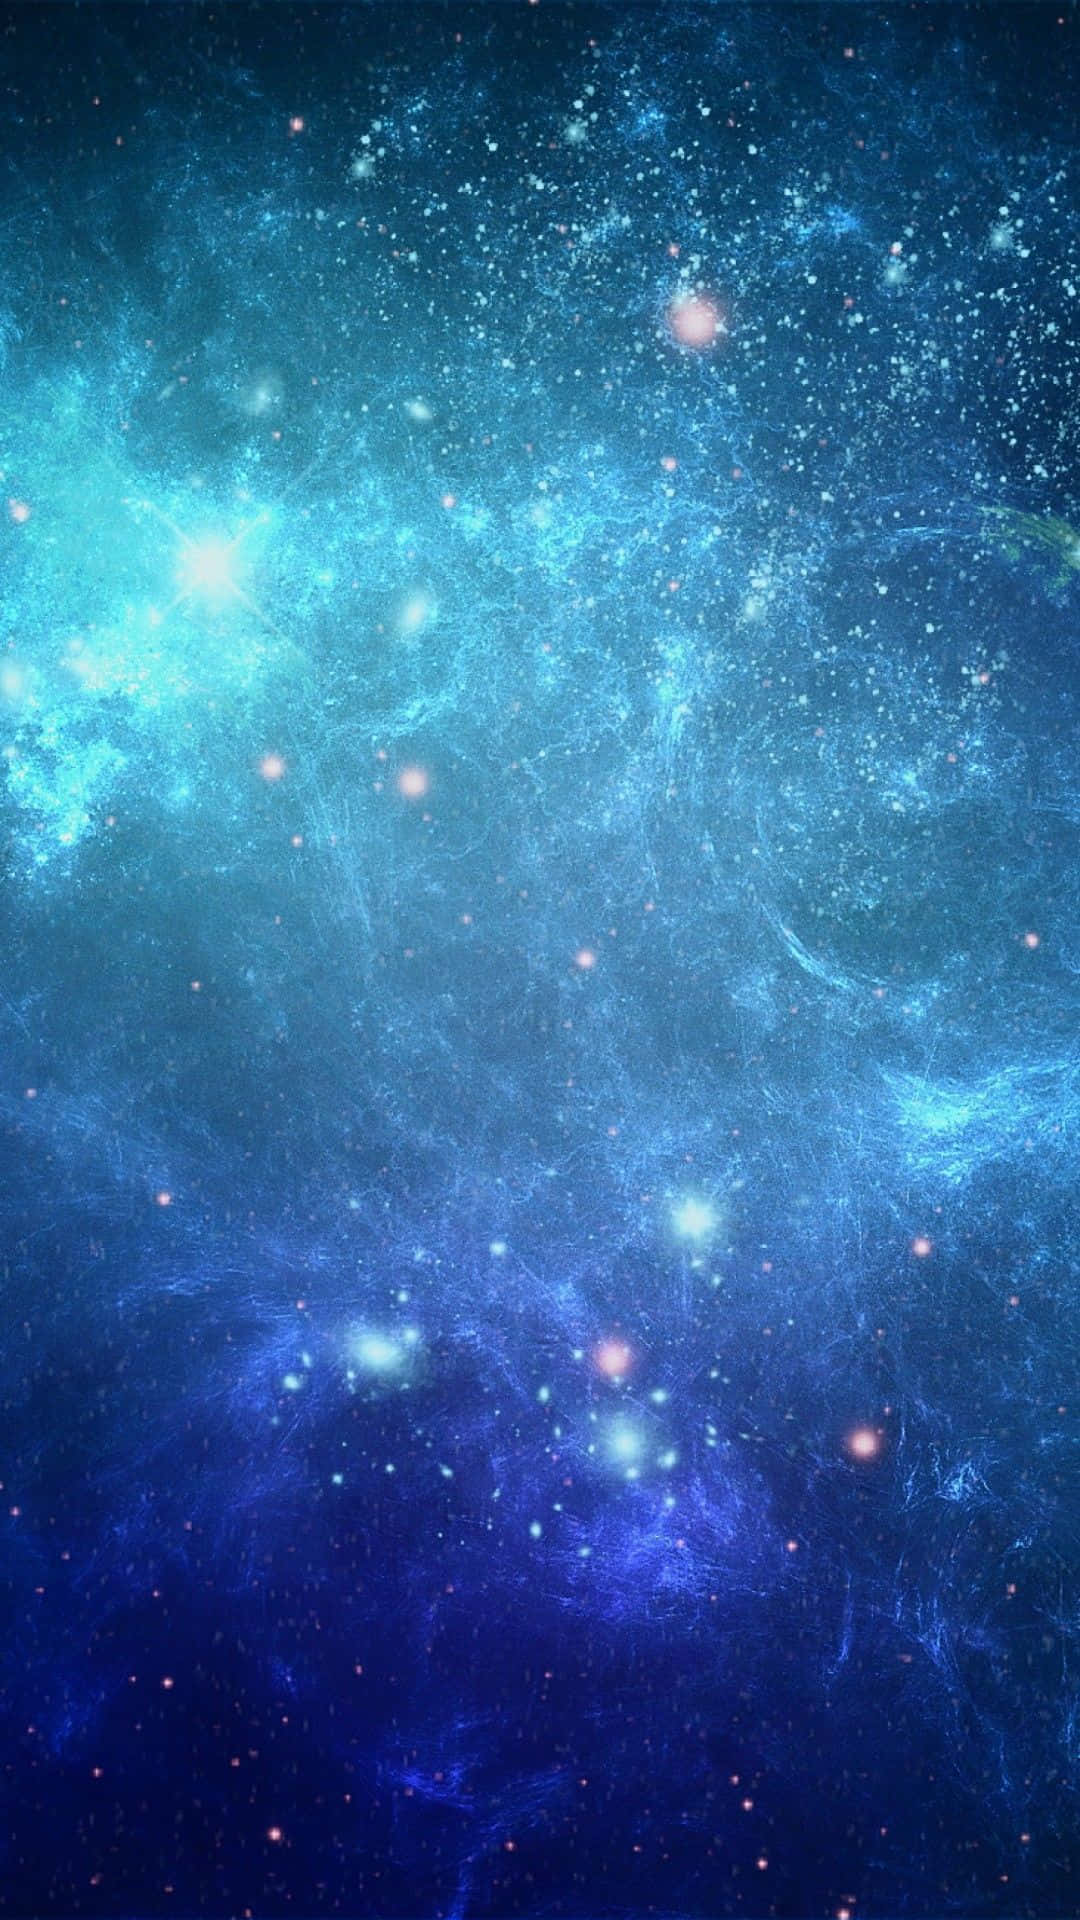 Gorgeous Blue Galaxy Themed iPhone Wallpaper